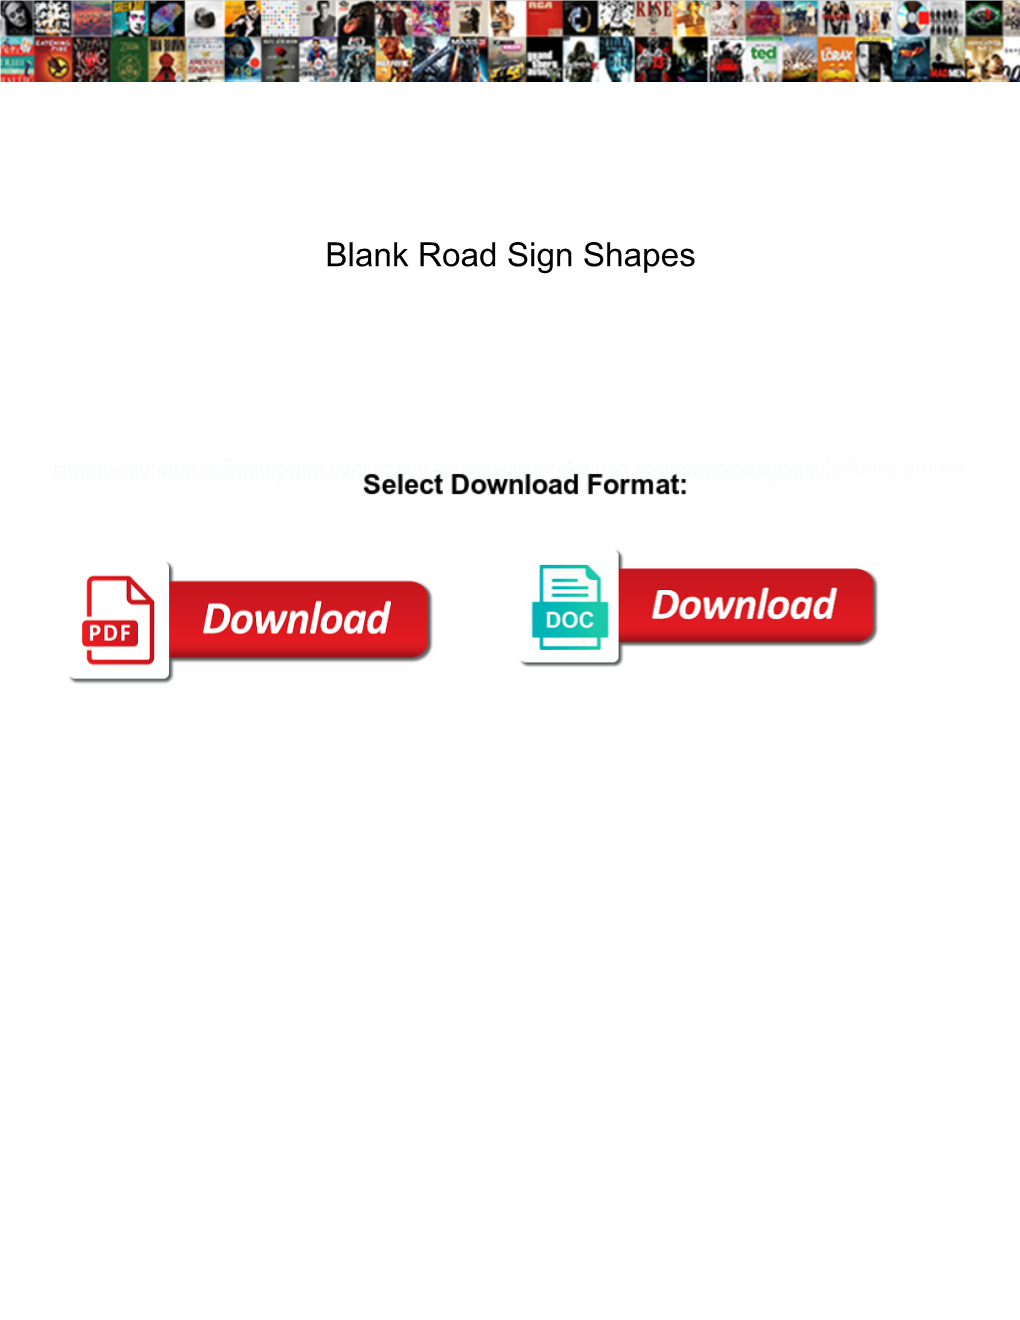 Blank Road Sign Shapes